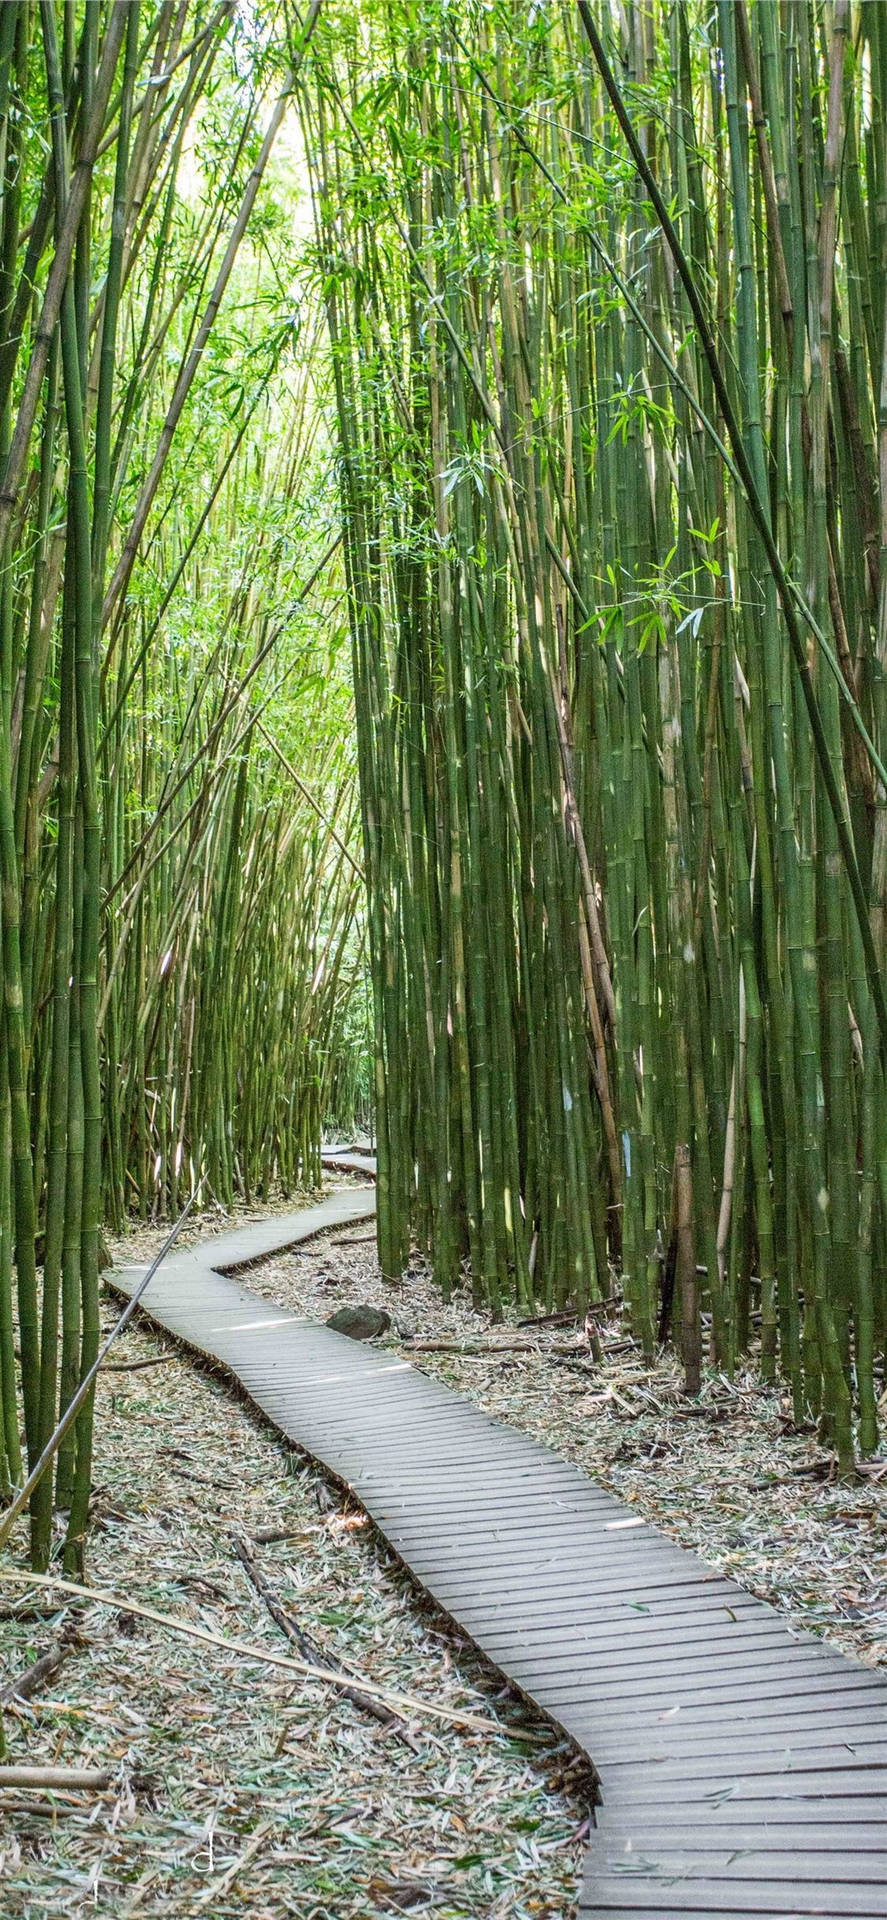 Paved Bamboo Trail IPhone Wallpaper